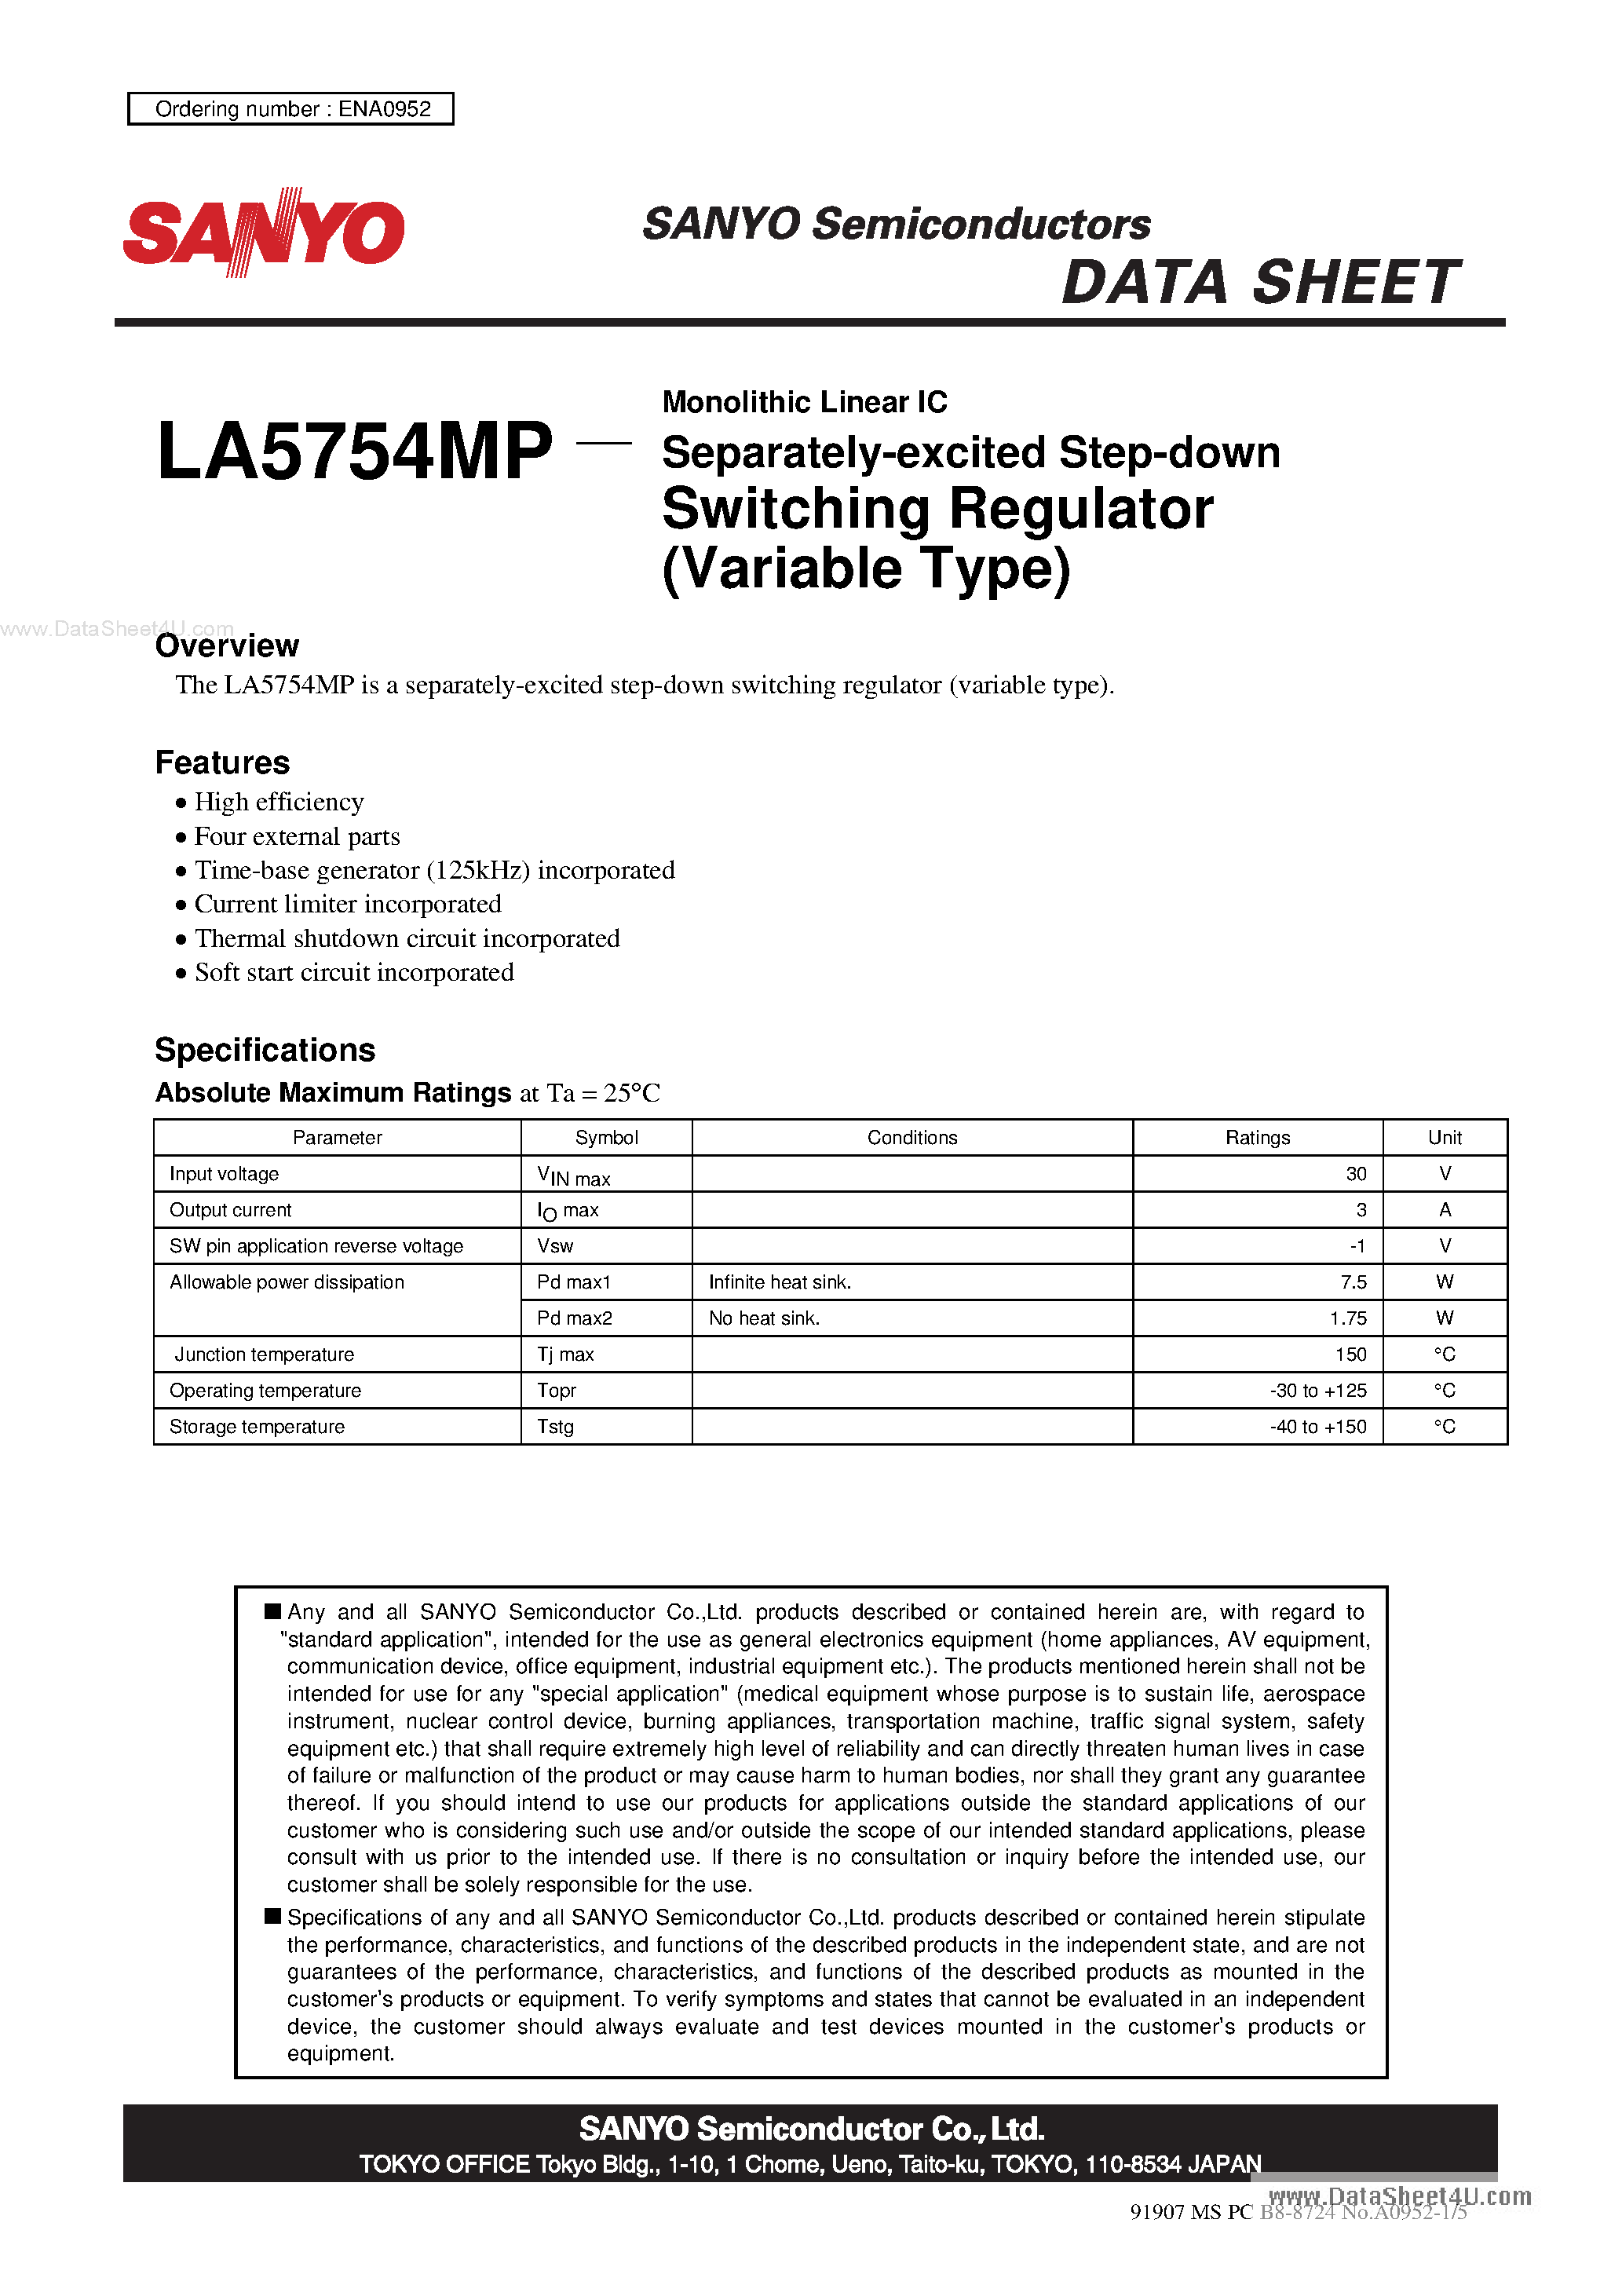 Даташит LA5754MP - Monolithic Linear IC Separately-Excited Step-Down Switching Regulator страница 1